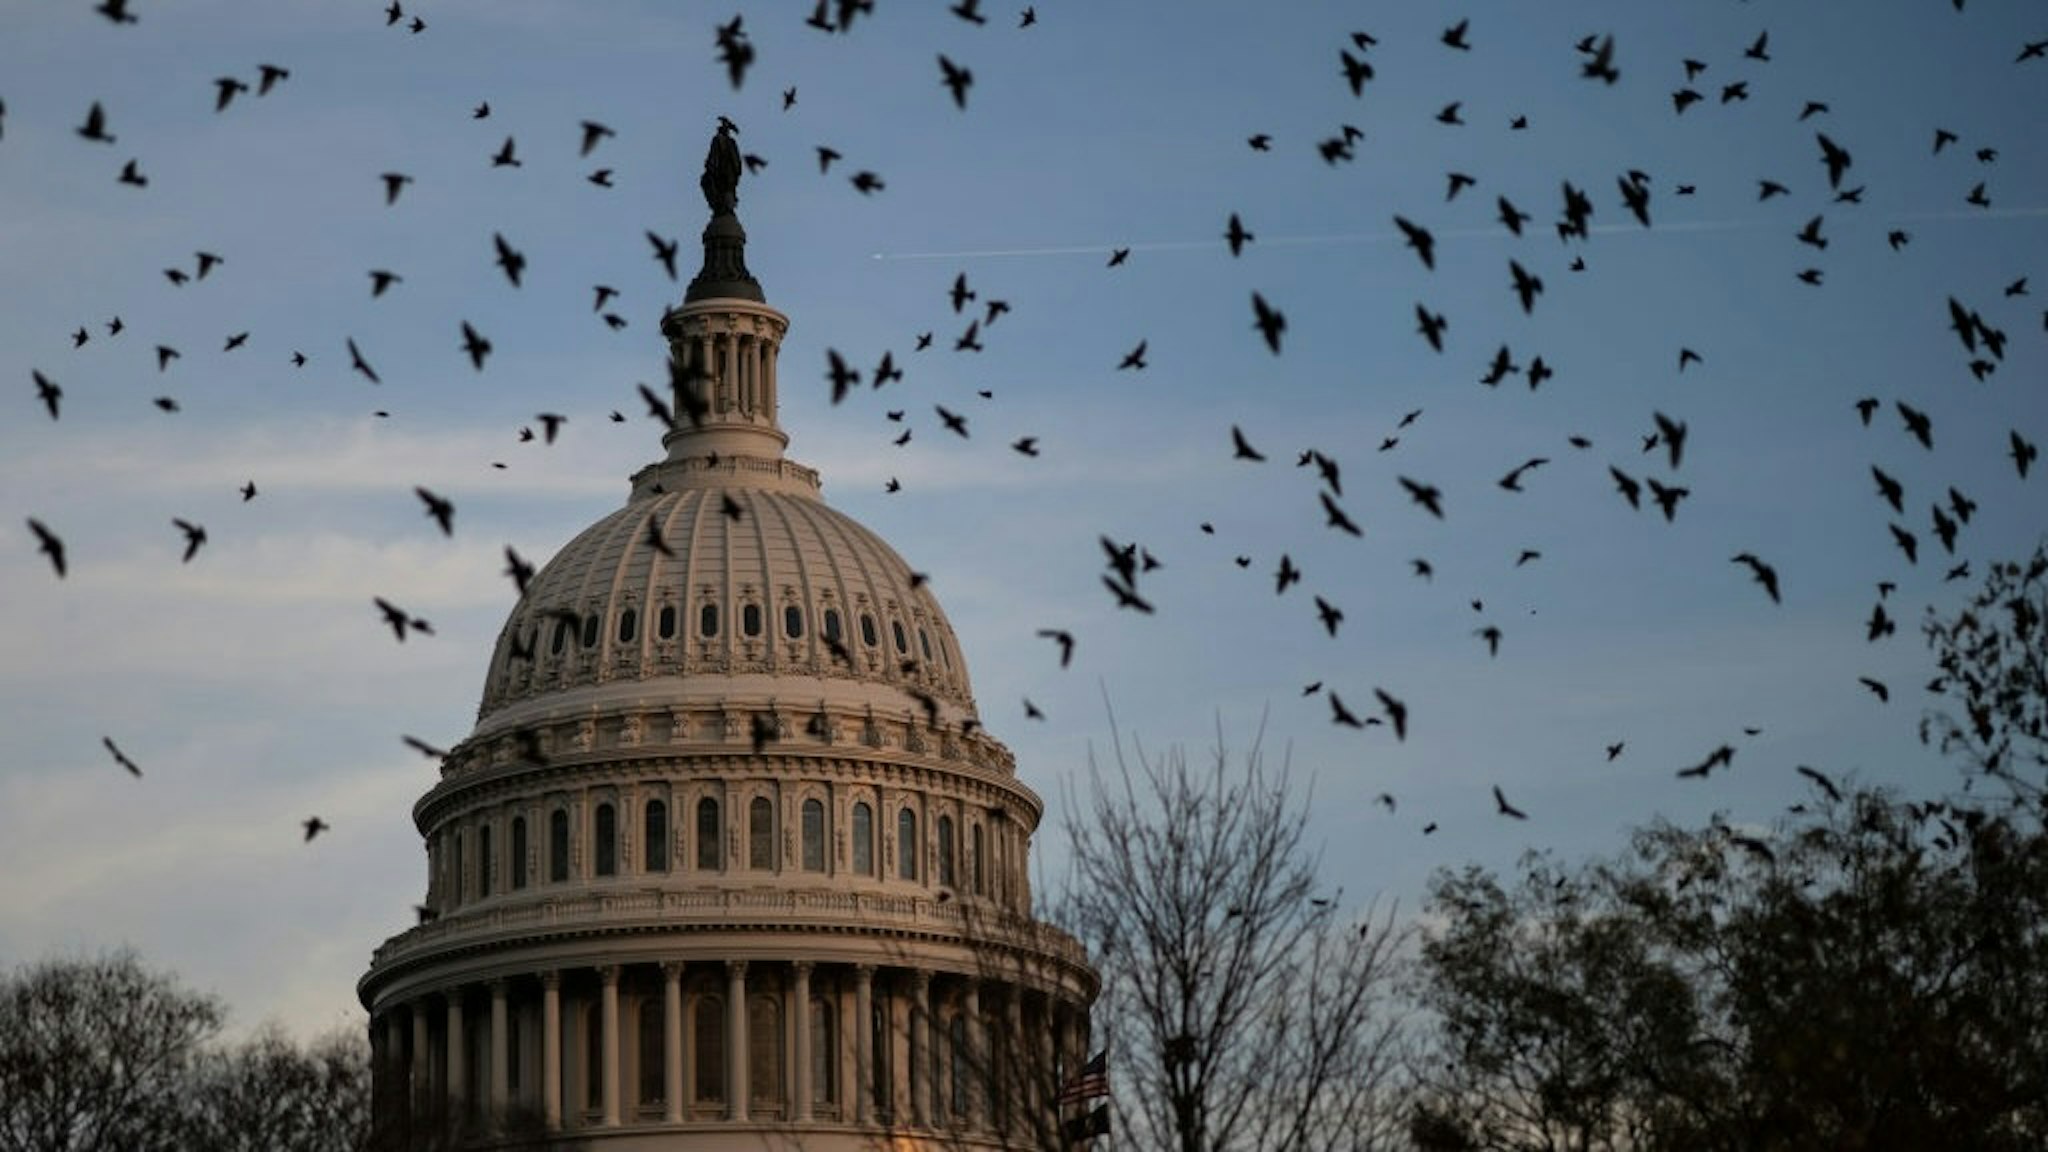 Lawmakers Work To Avert Government Shutdown WASHINGTON, DC - DECEMBER 2: A flock of birds flies near the U.S. Capitol at dusk on December 2, 2021 in Washington, DC. With a deadline at midnight on Friday, Congressional leaders are working to pass a continuing resolution to fund the government and avoid a government shutdown. (Photo by Drew Angerer/Getty Images) Drew Angerer / Staff